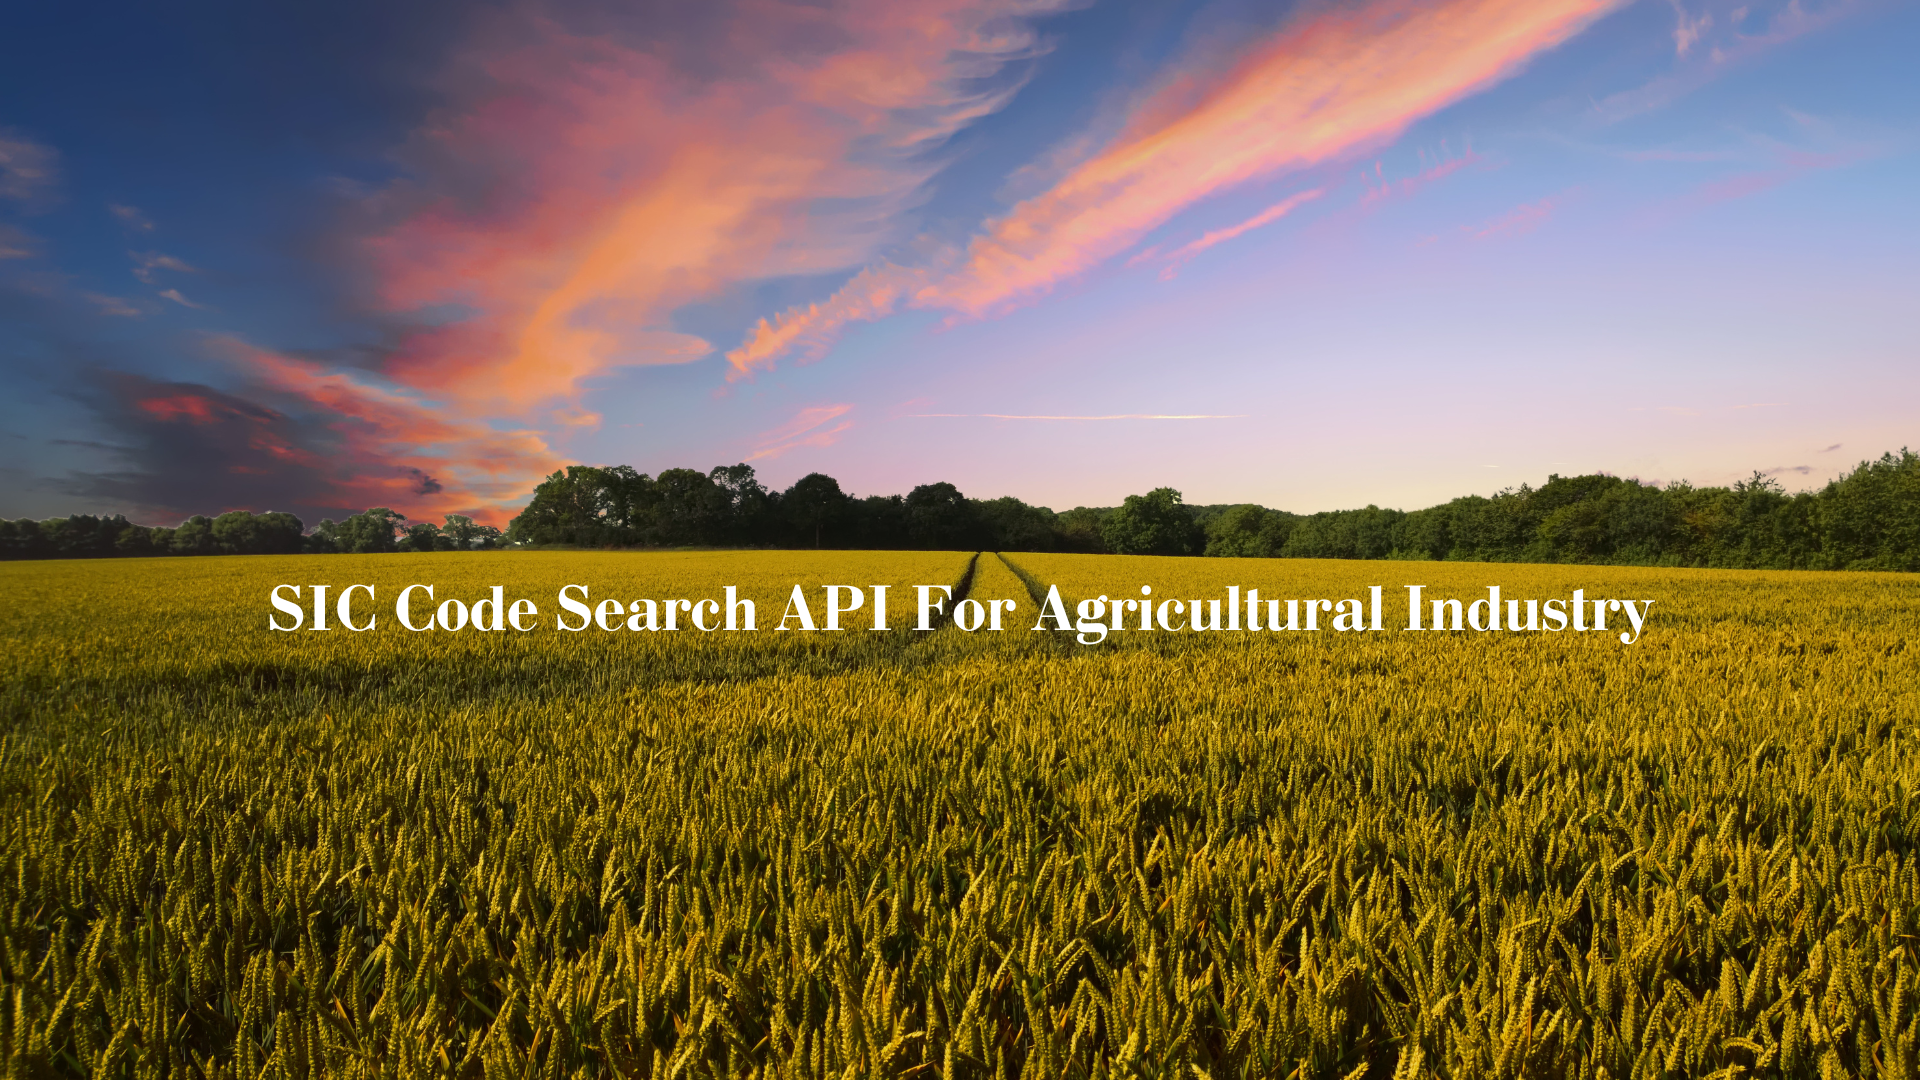 SIC Code Search API For Agricultural Industry